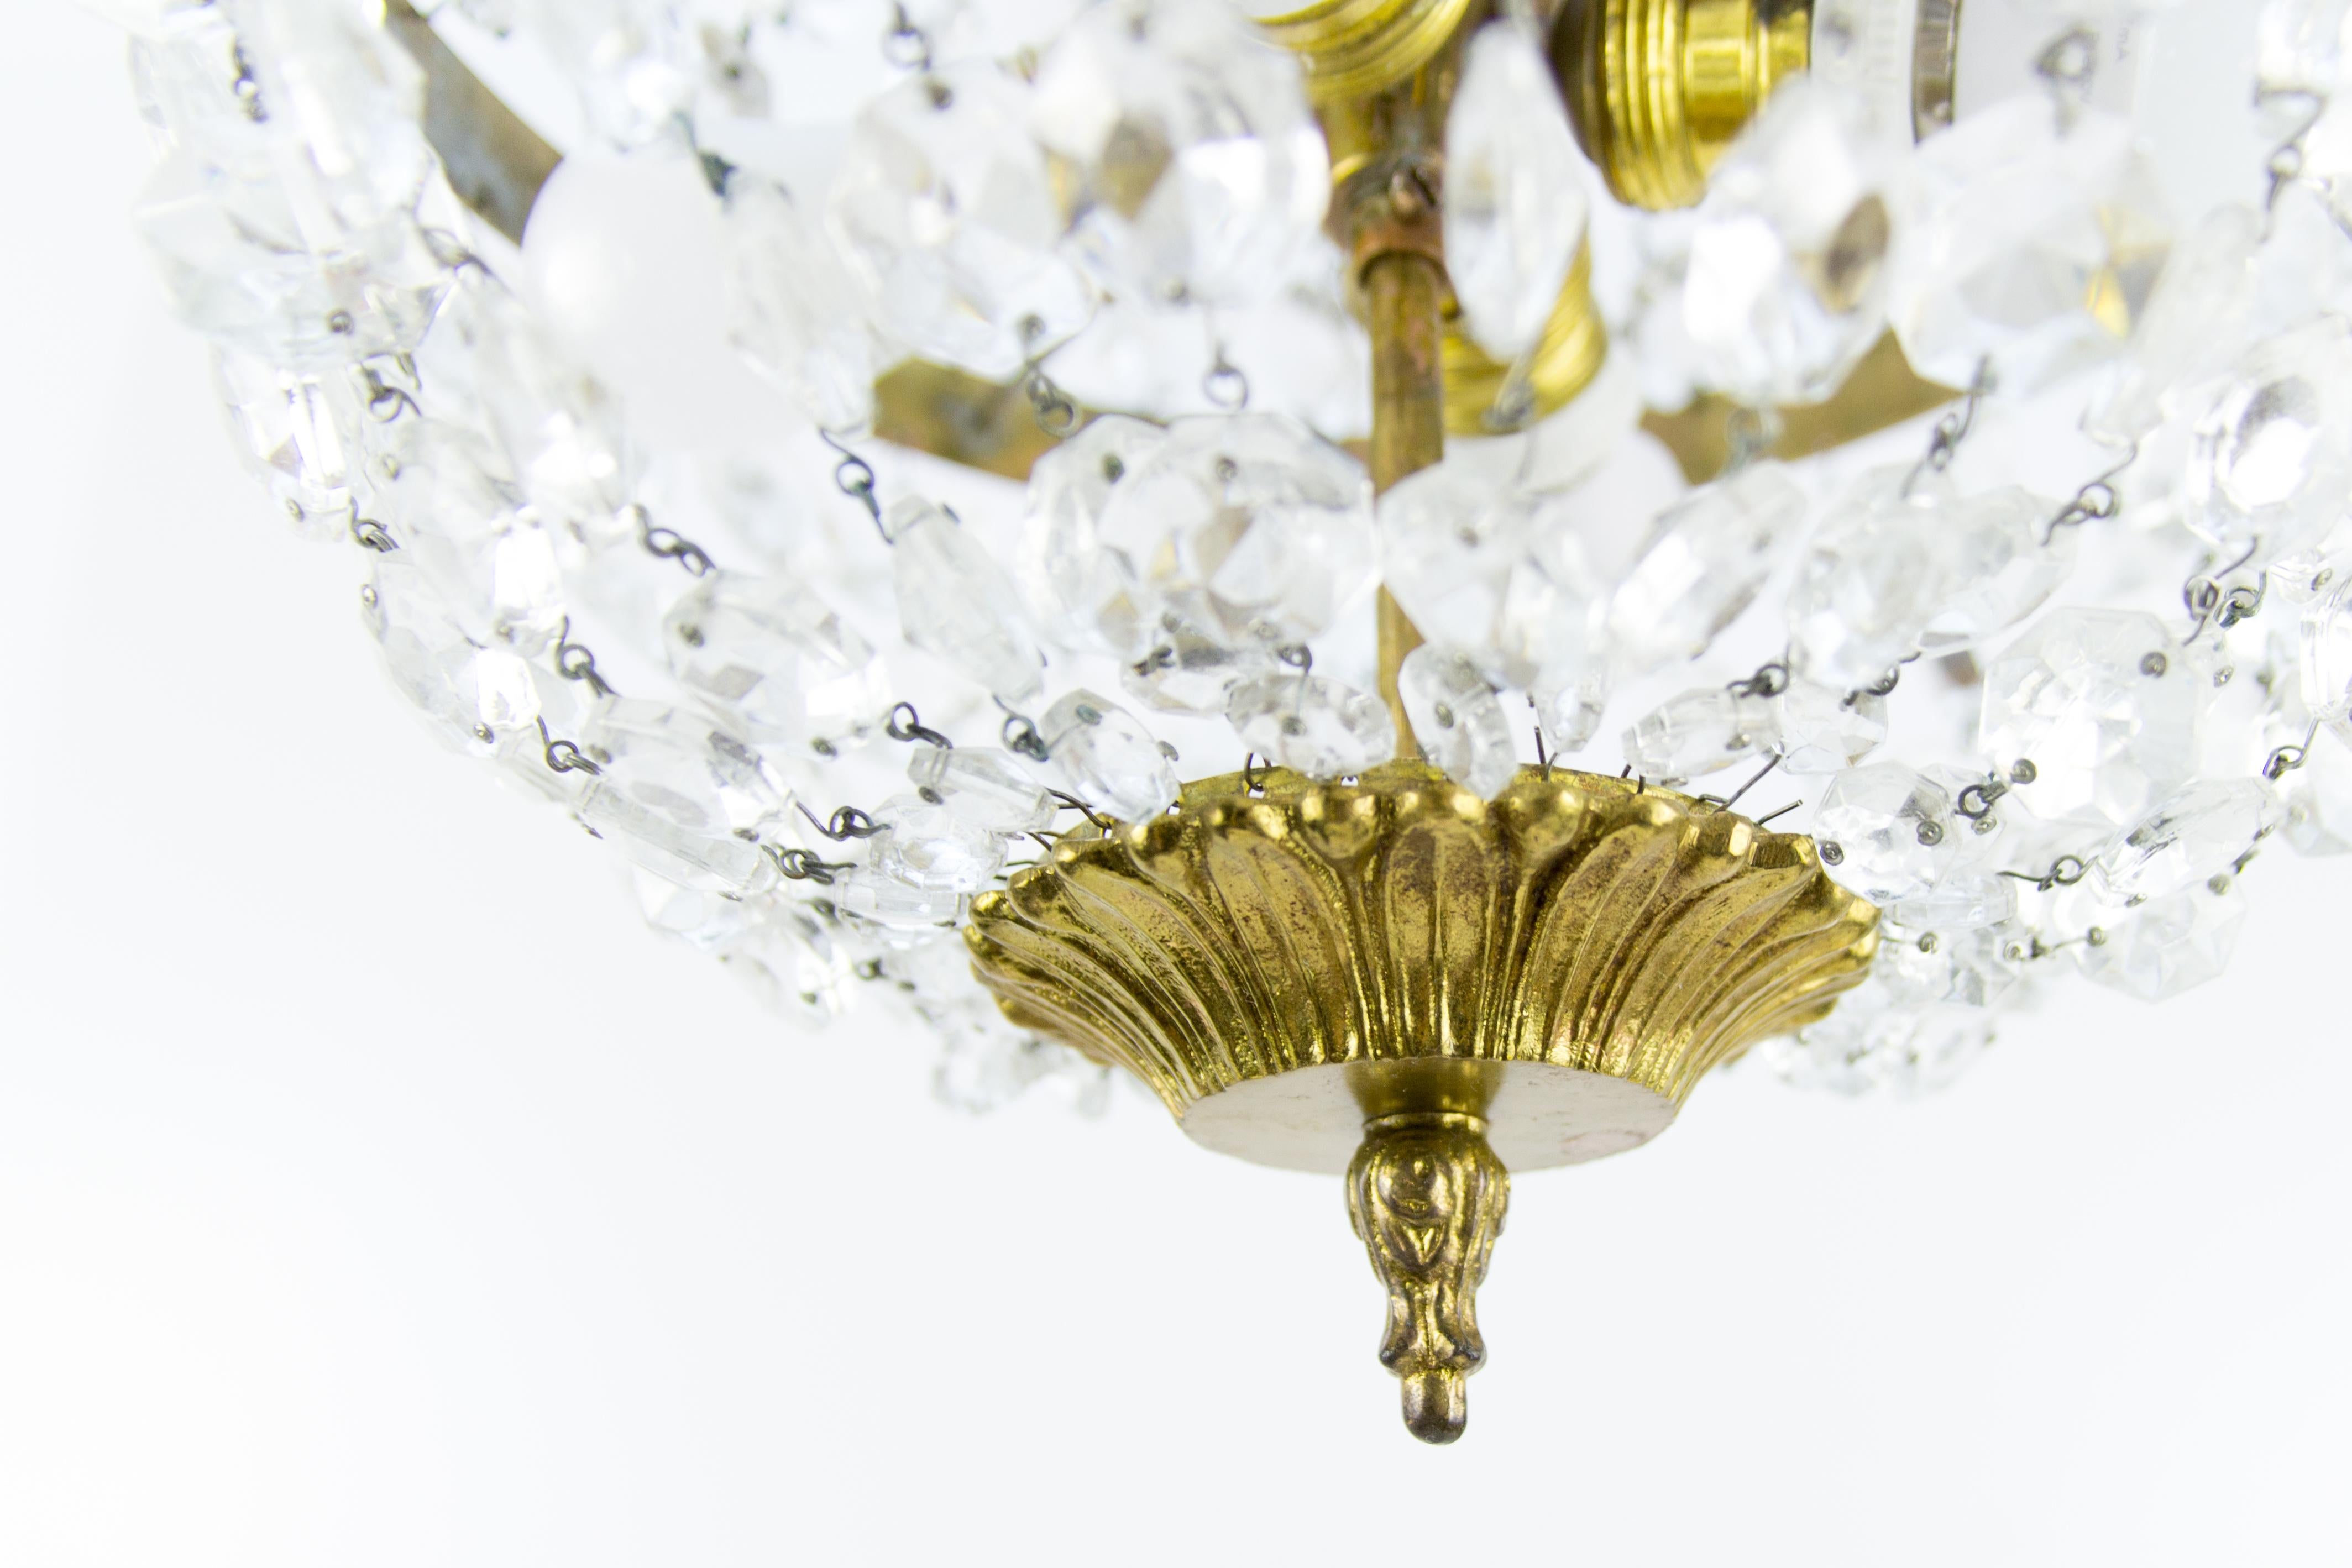 French Empire style four-light crystal, brass, and bronze basket-shaped chandelier from the 1920s. Four interior lights with original E27 (E26) size light bulb sockets. The crown is decorated with bronze plumes and pendeloque crystal